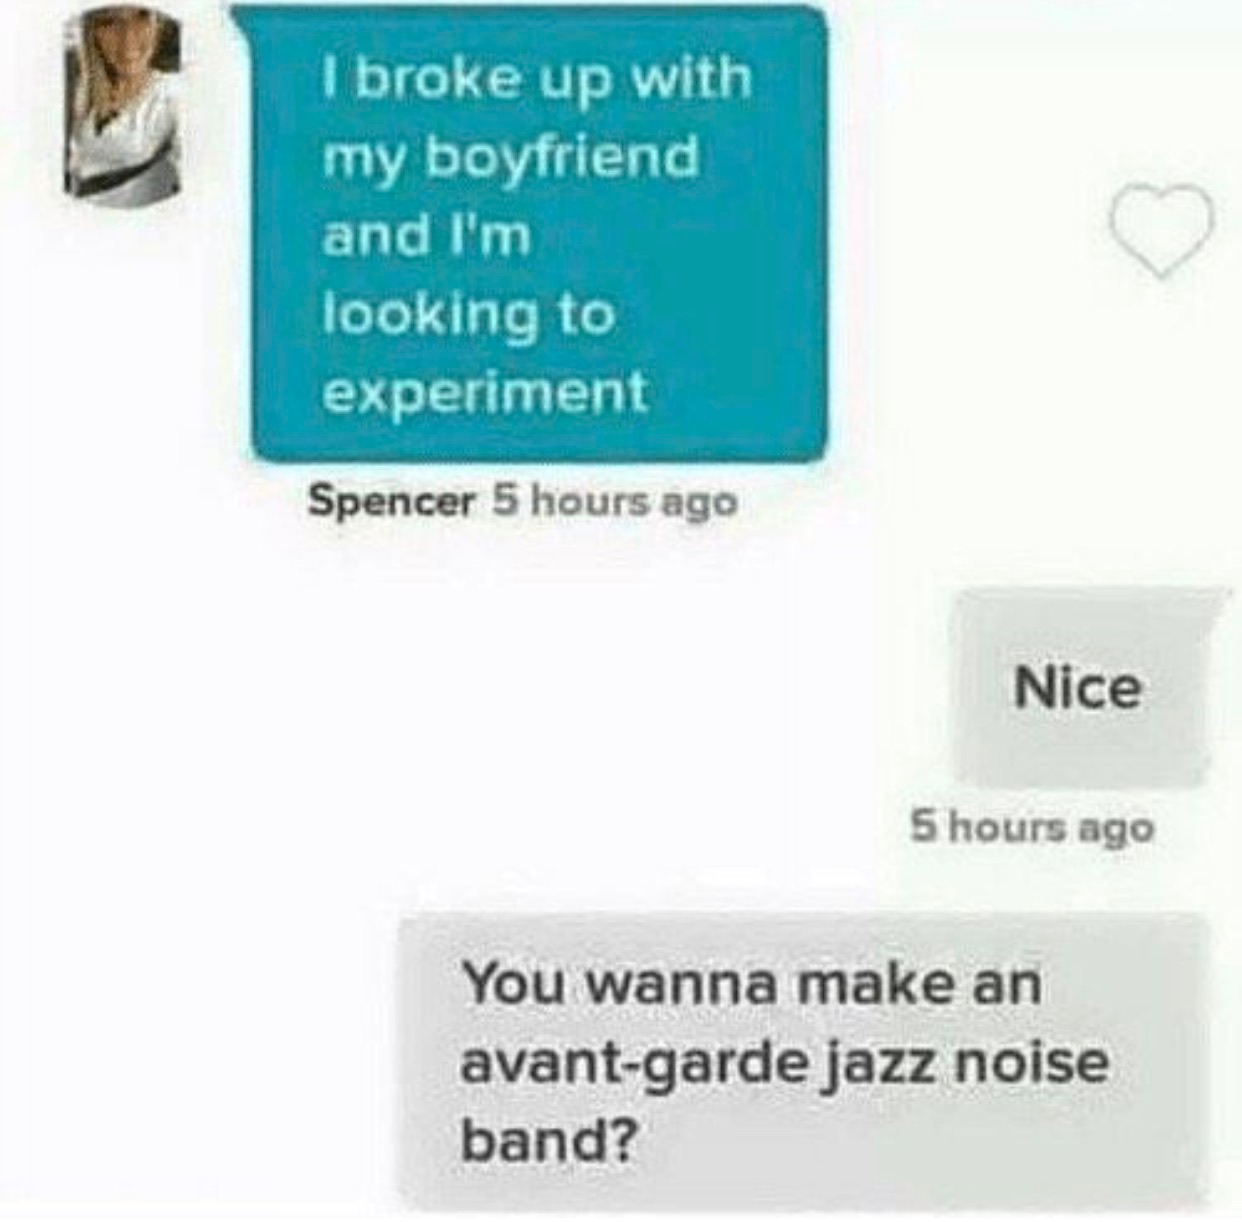 broked up - I broke up with my boyfriend and I'm looking to experiment Spencer 5 hours ago Nice 5 hours ago You wanna make an avantgarde jazz noise band?